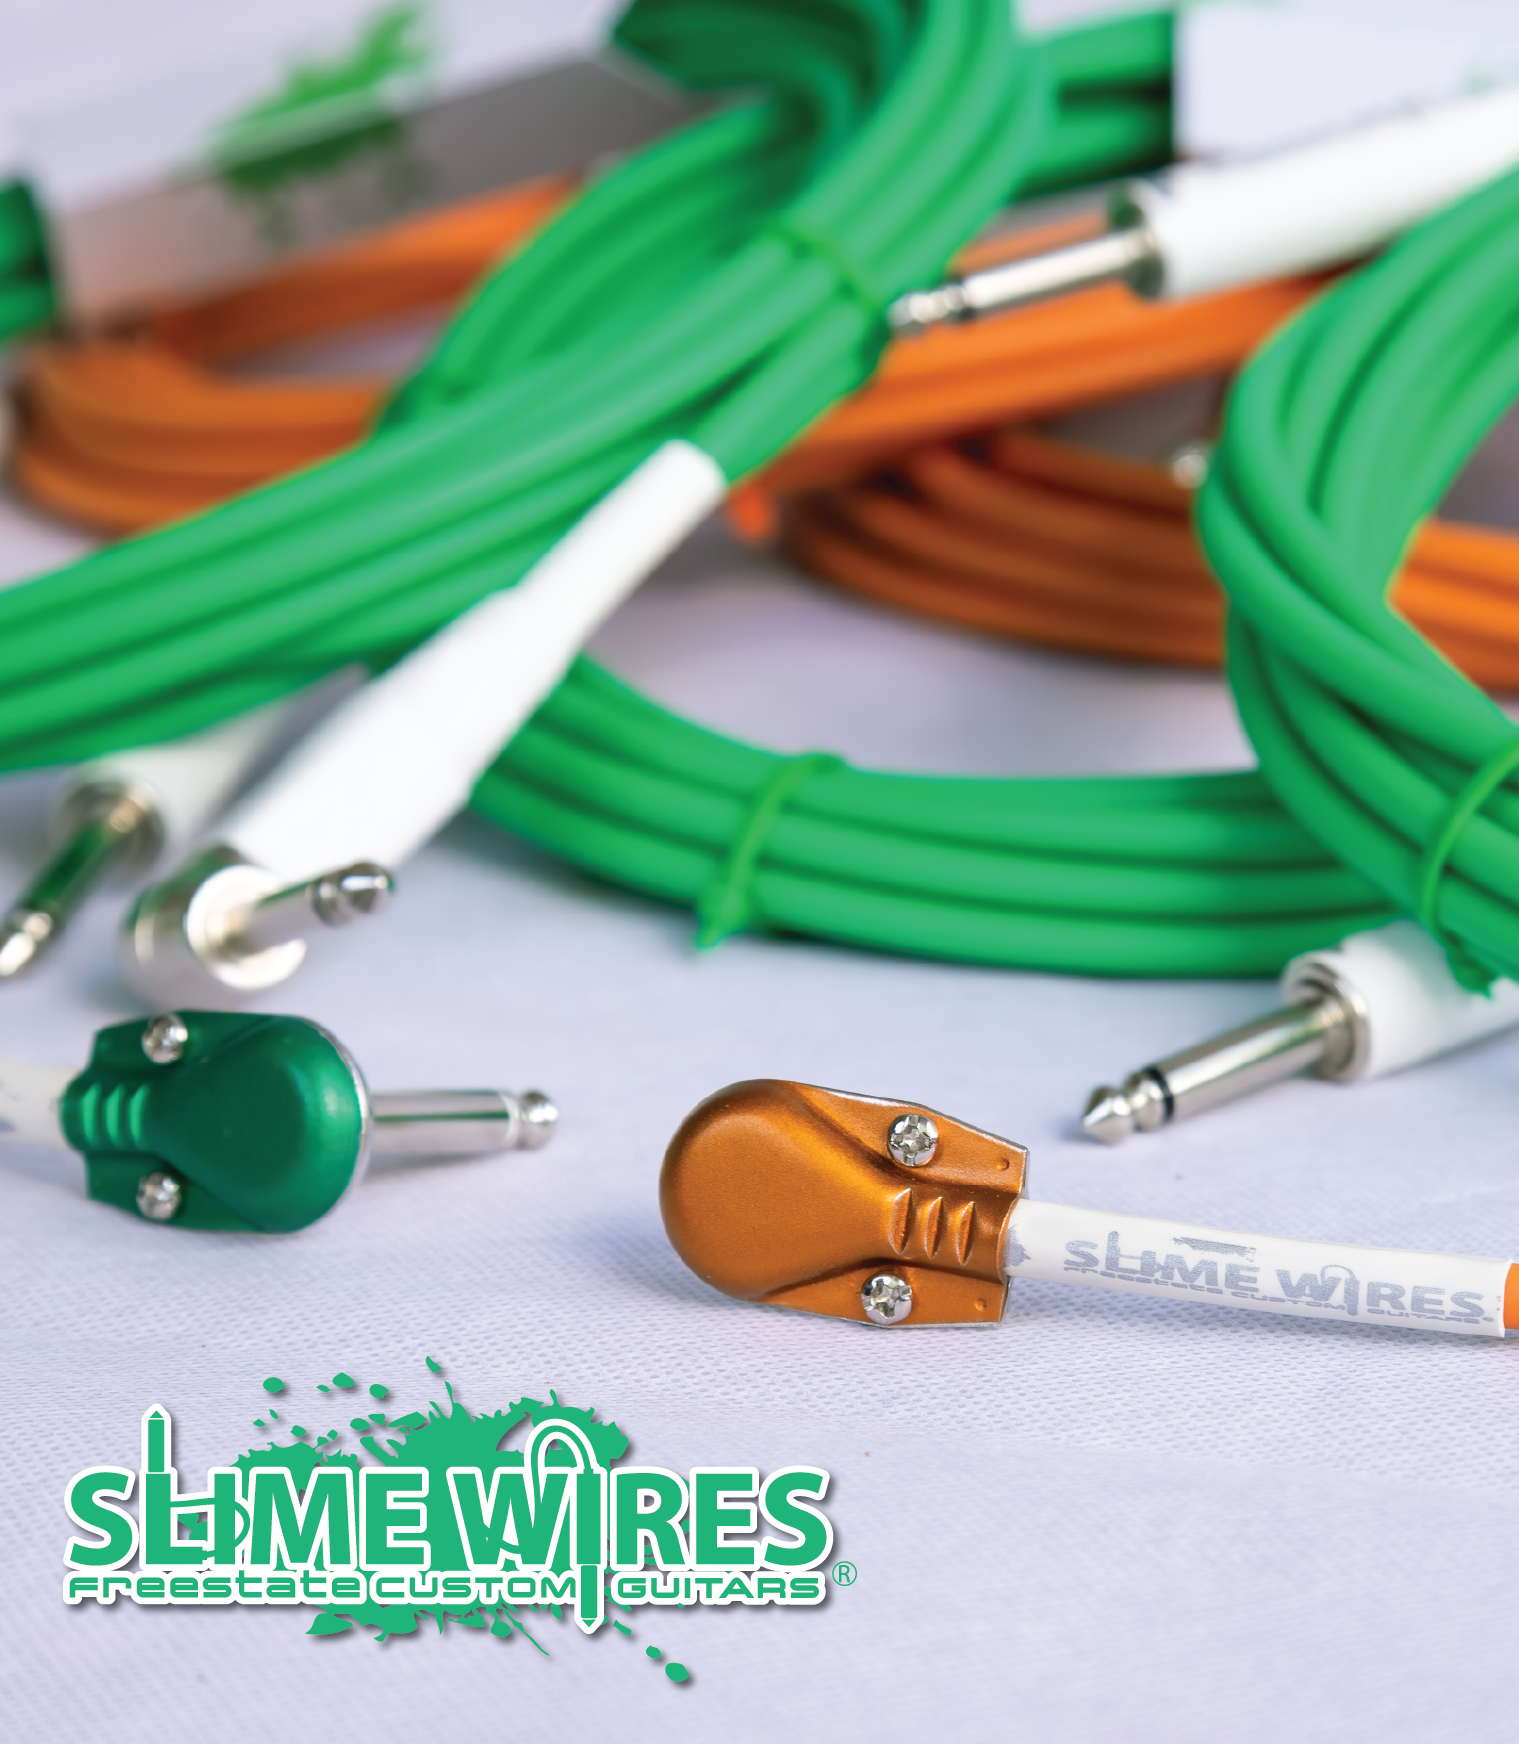 Slime Wires